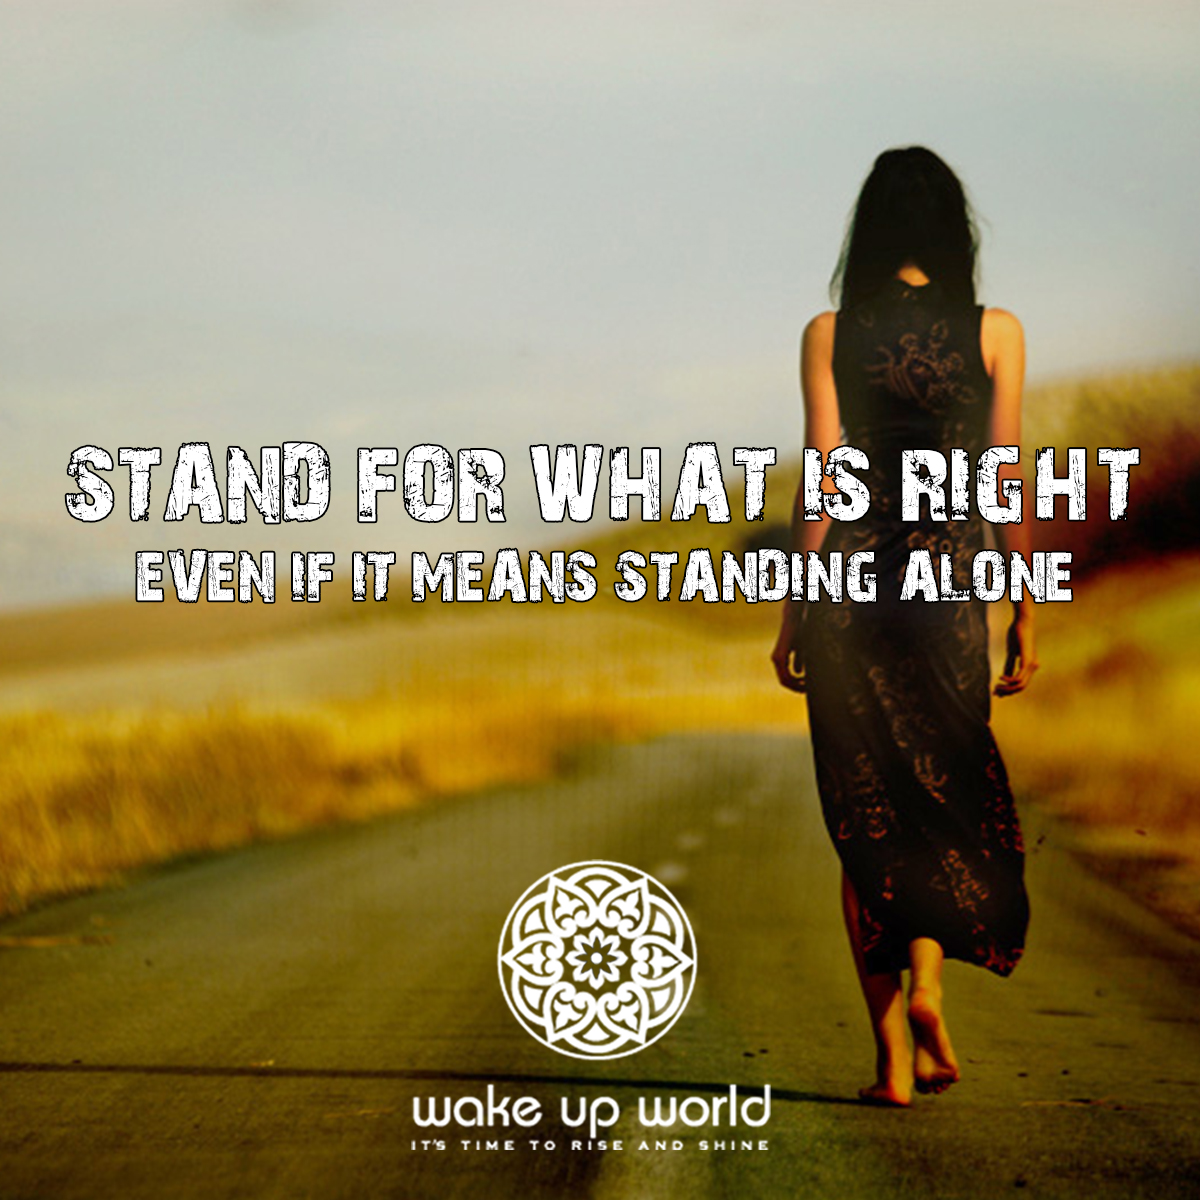 Stand for what is right even if it means standing alone